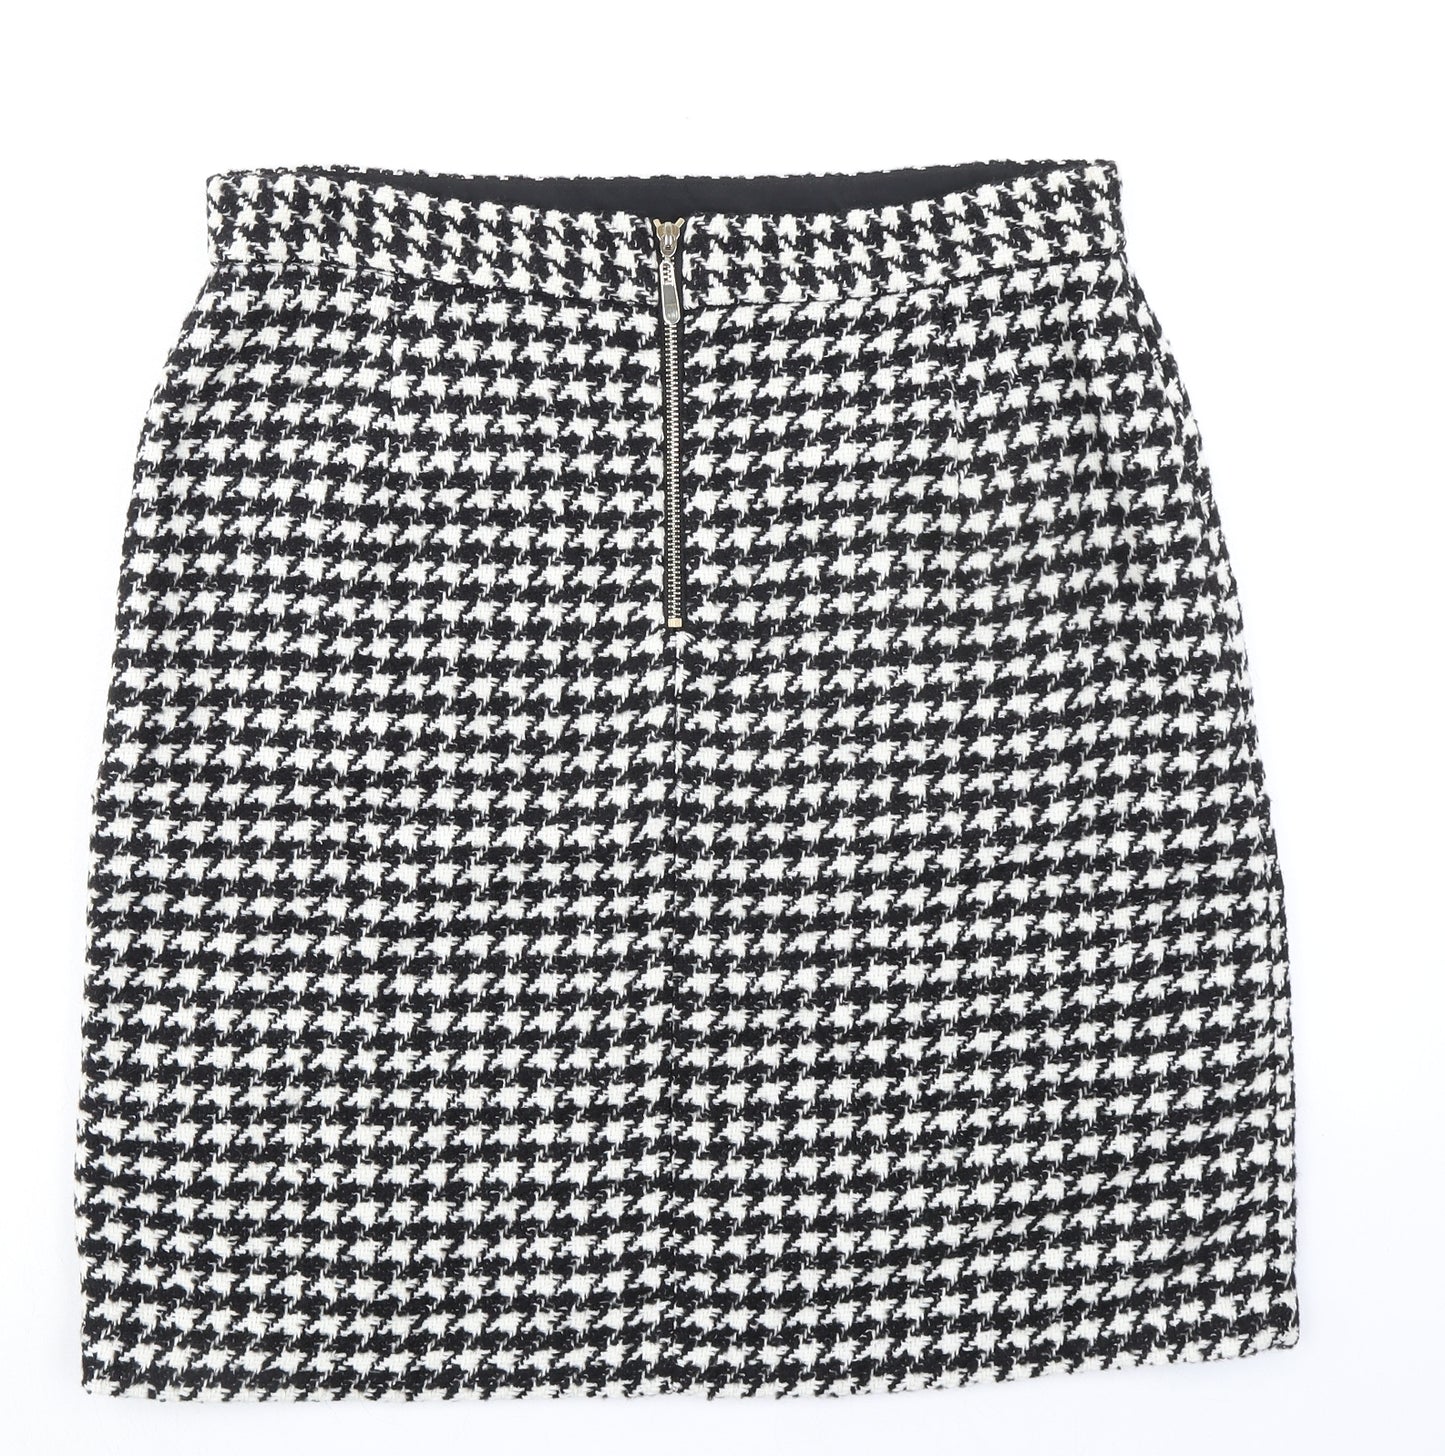 Marks and Spencer Womens Black Geometric Acrylic A-Line Skirt Size 14 Zip - Houndstooth pattern